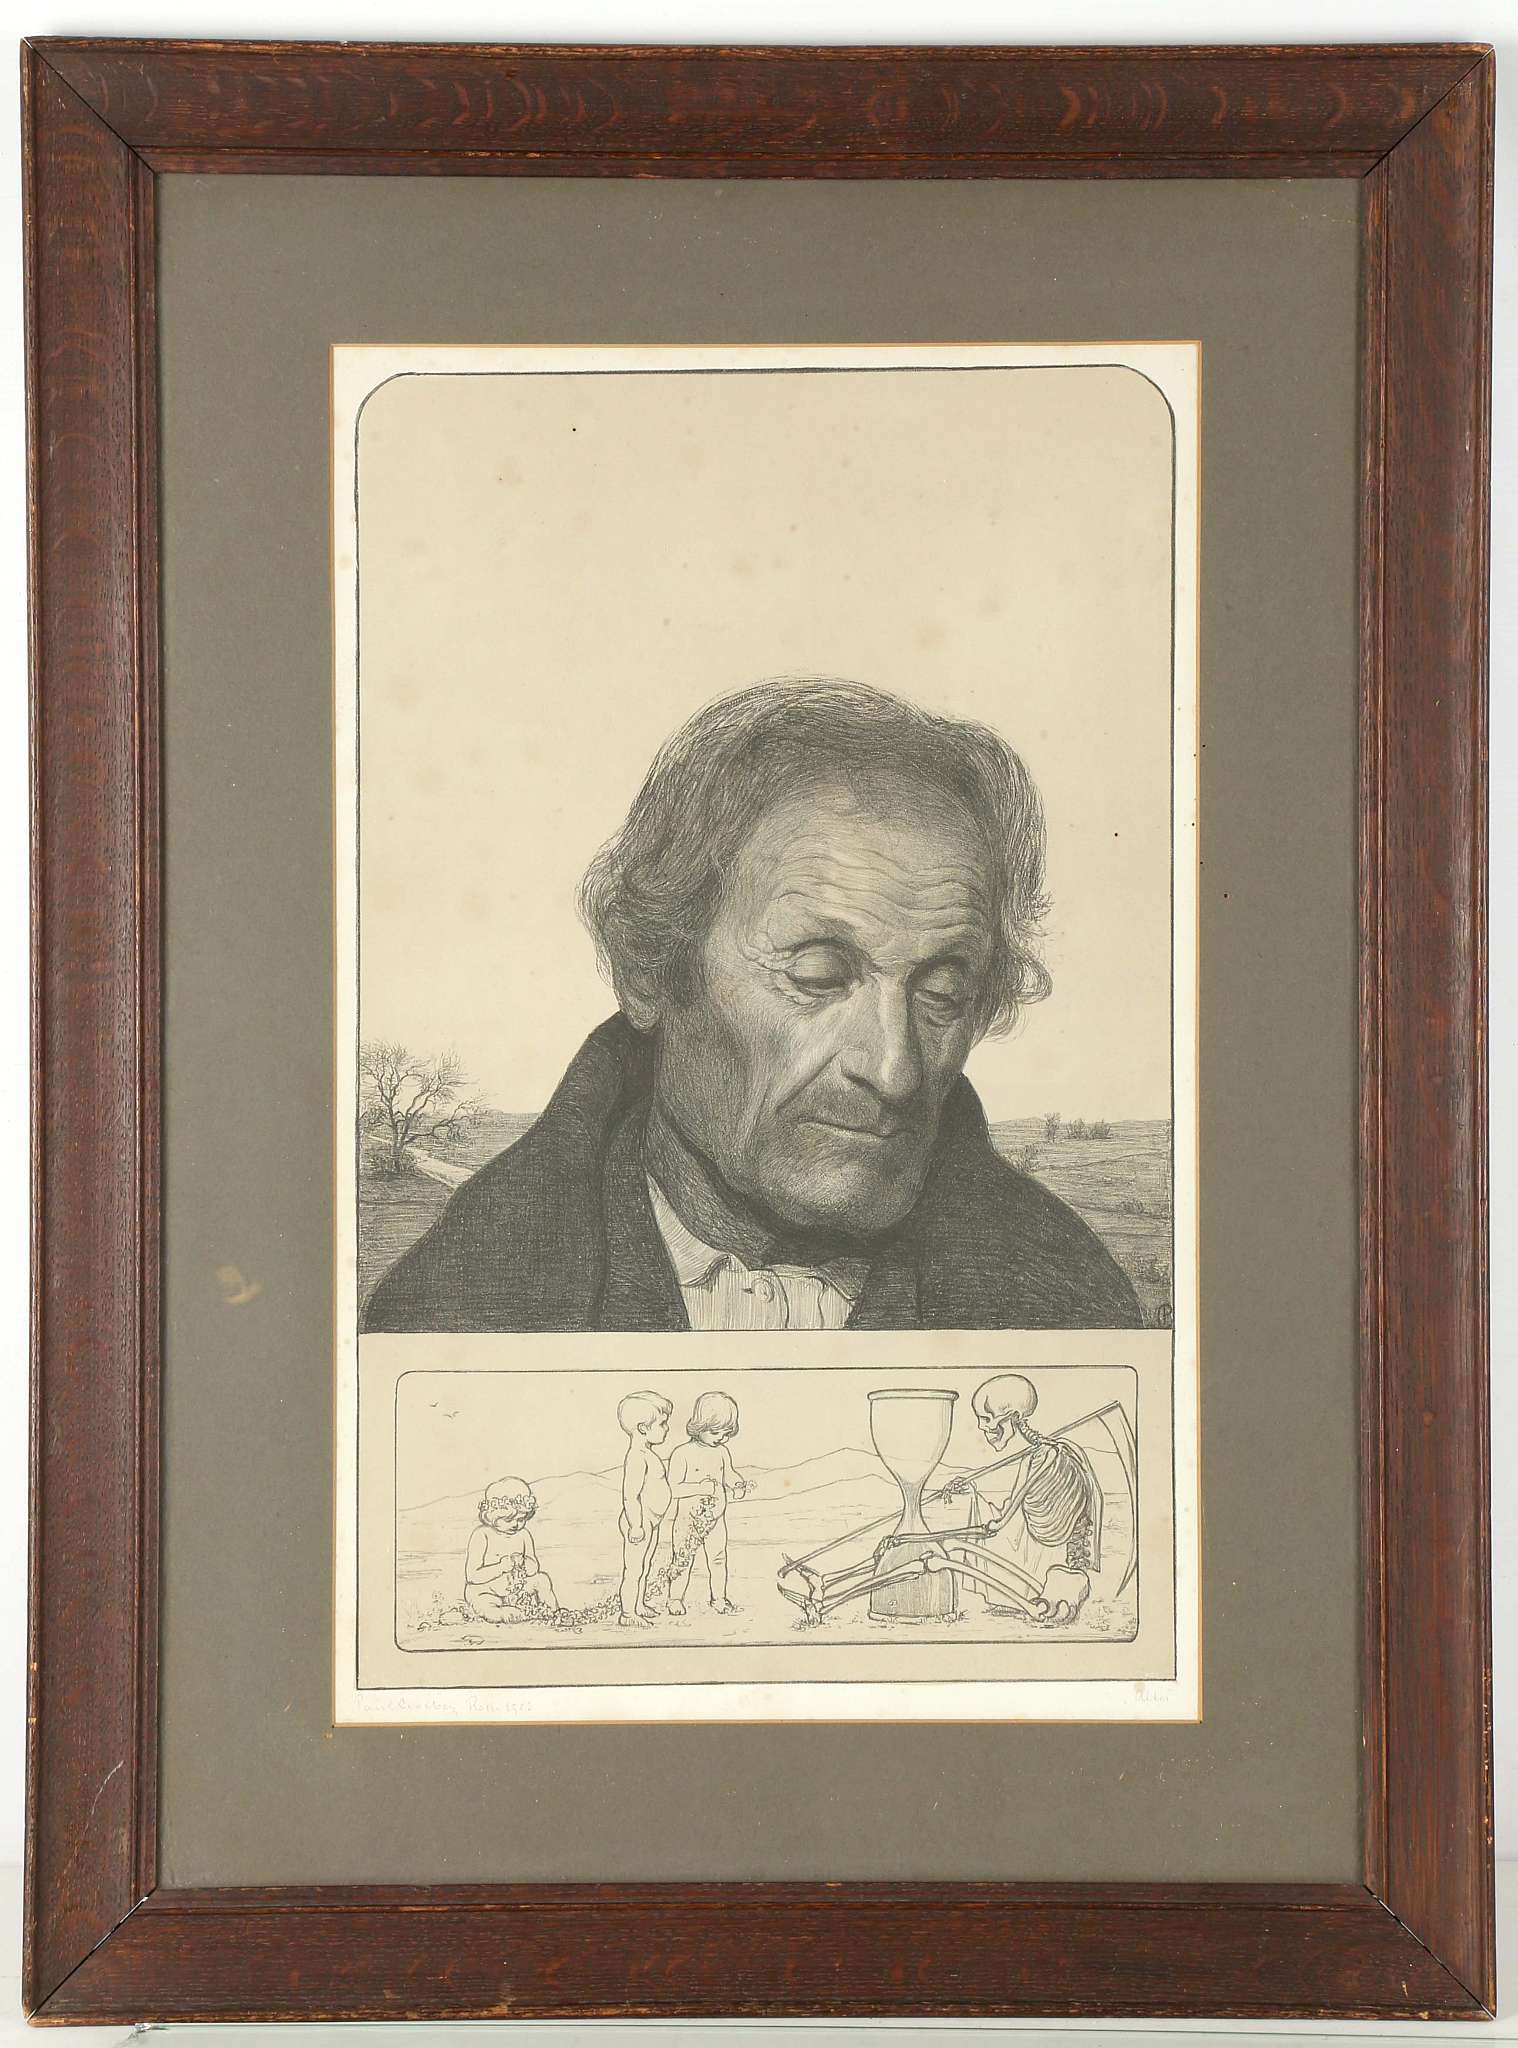 Paul Goeber, 19th Century, portrait engraving, signed and framed, together with a coloured engraving - Image 4 of 5